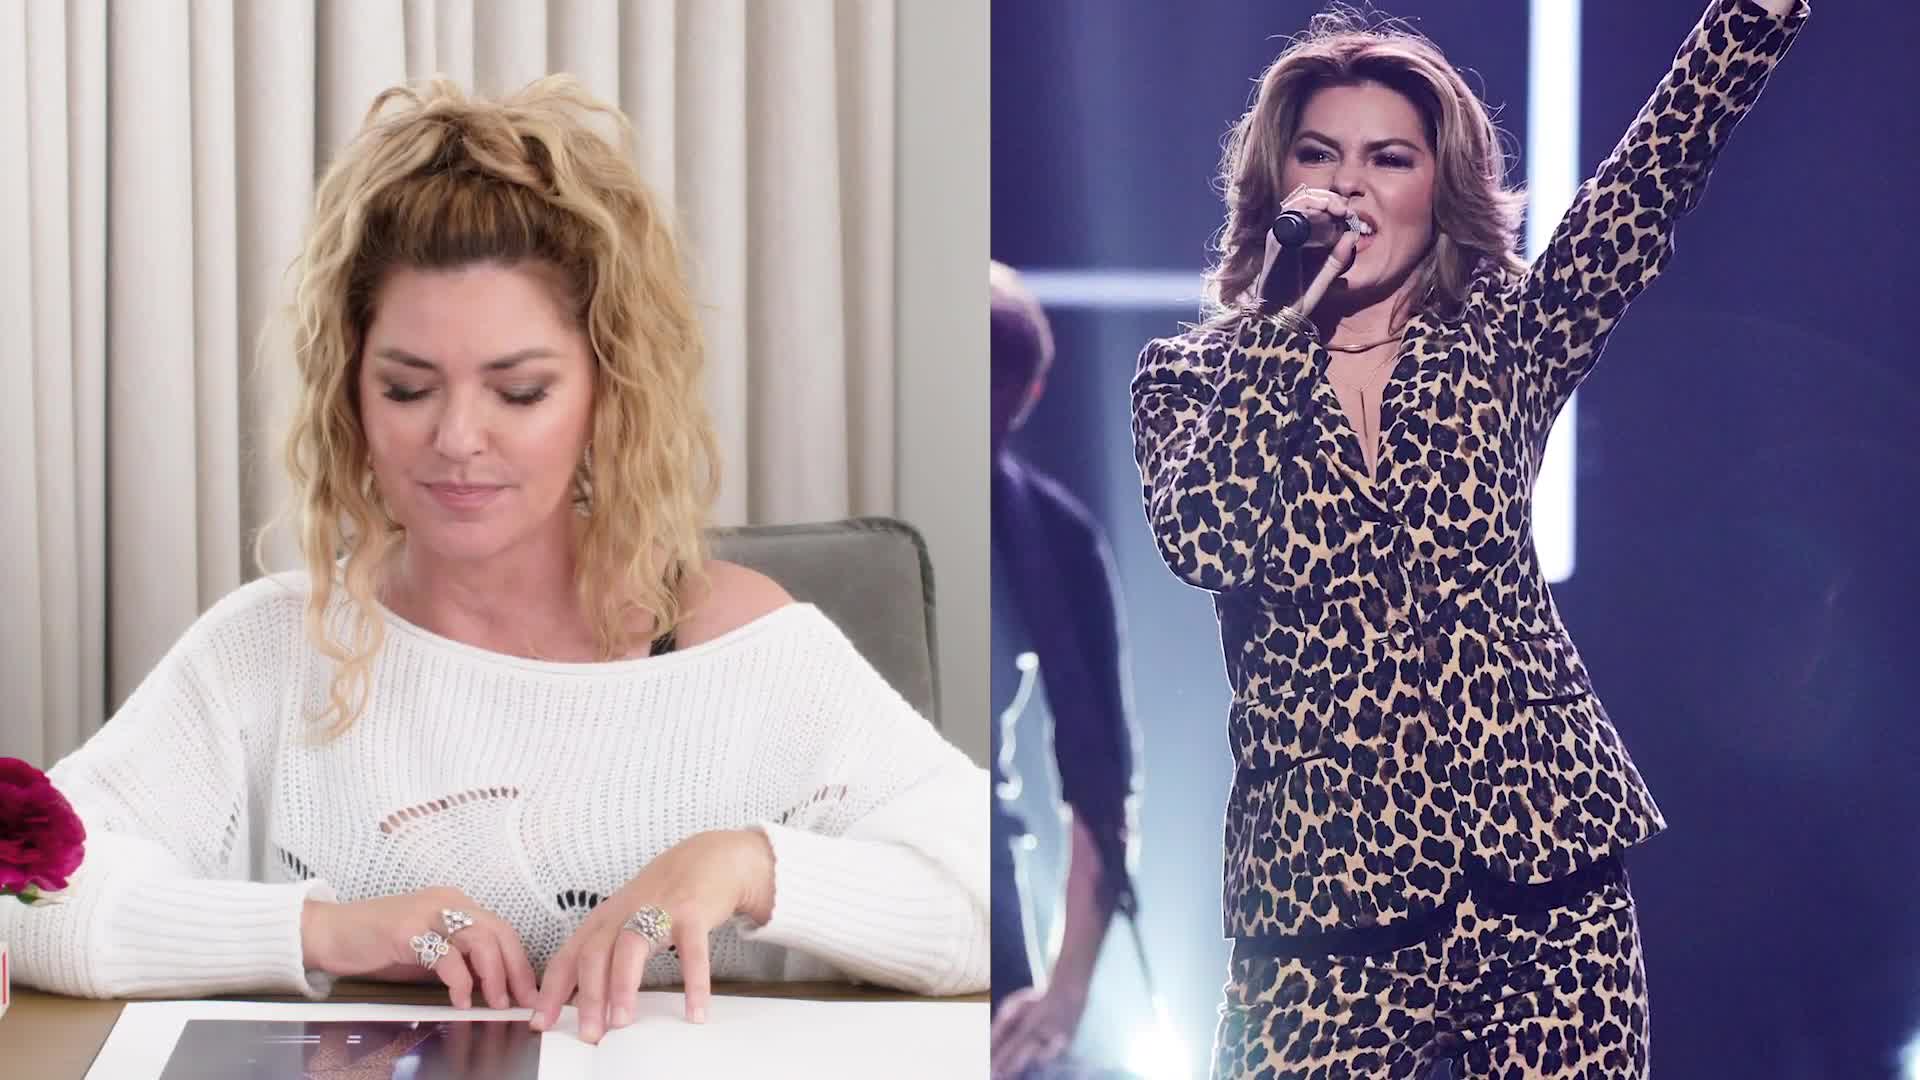 Watch Shania Twain on Her Best Fashion Moments, From Leopard